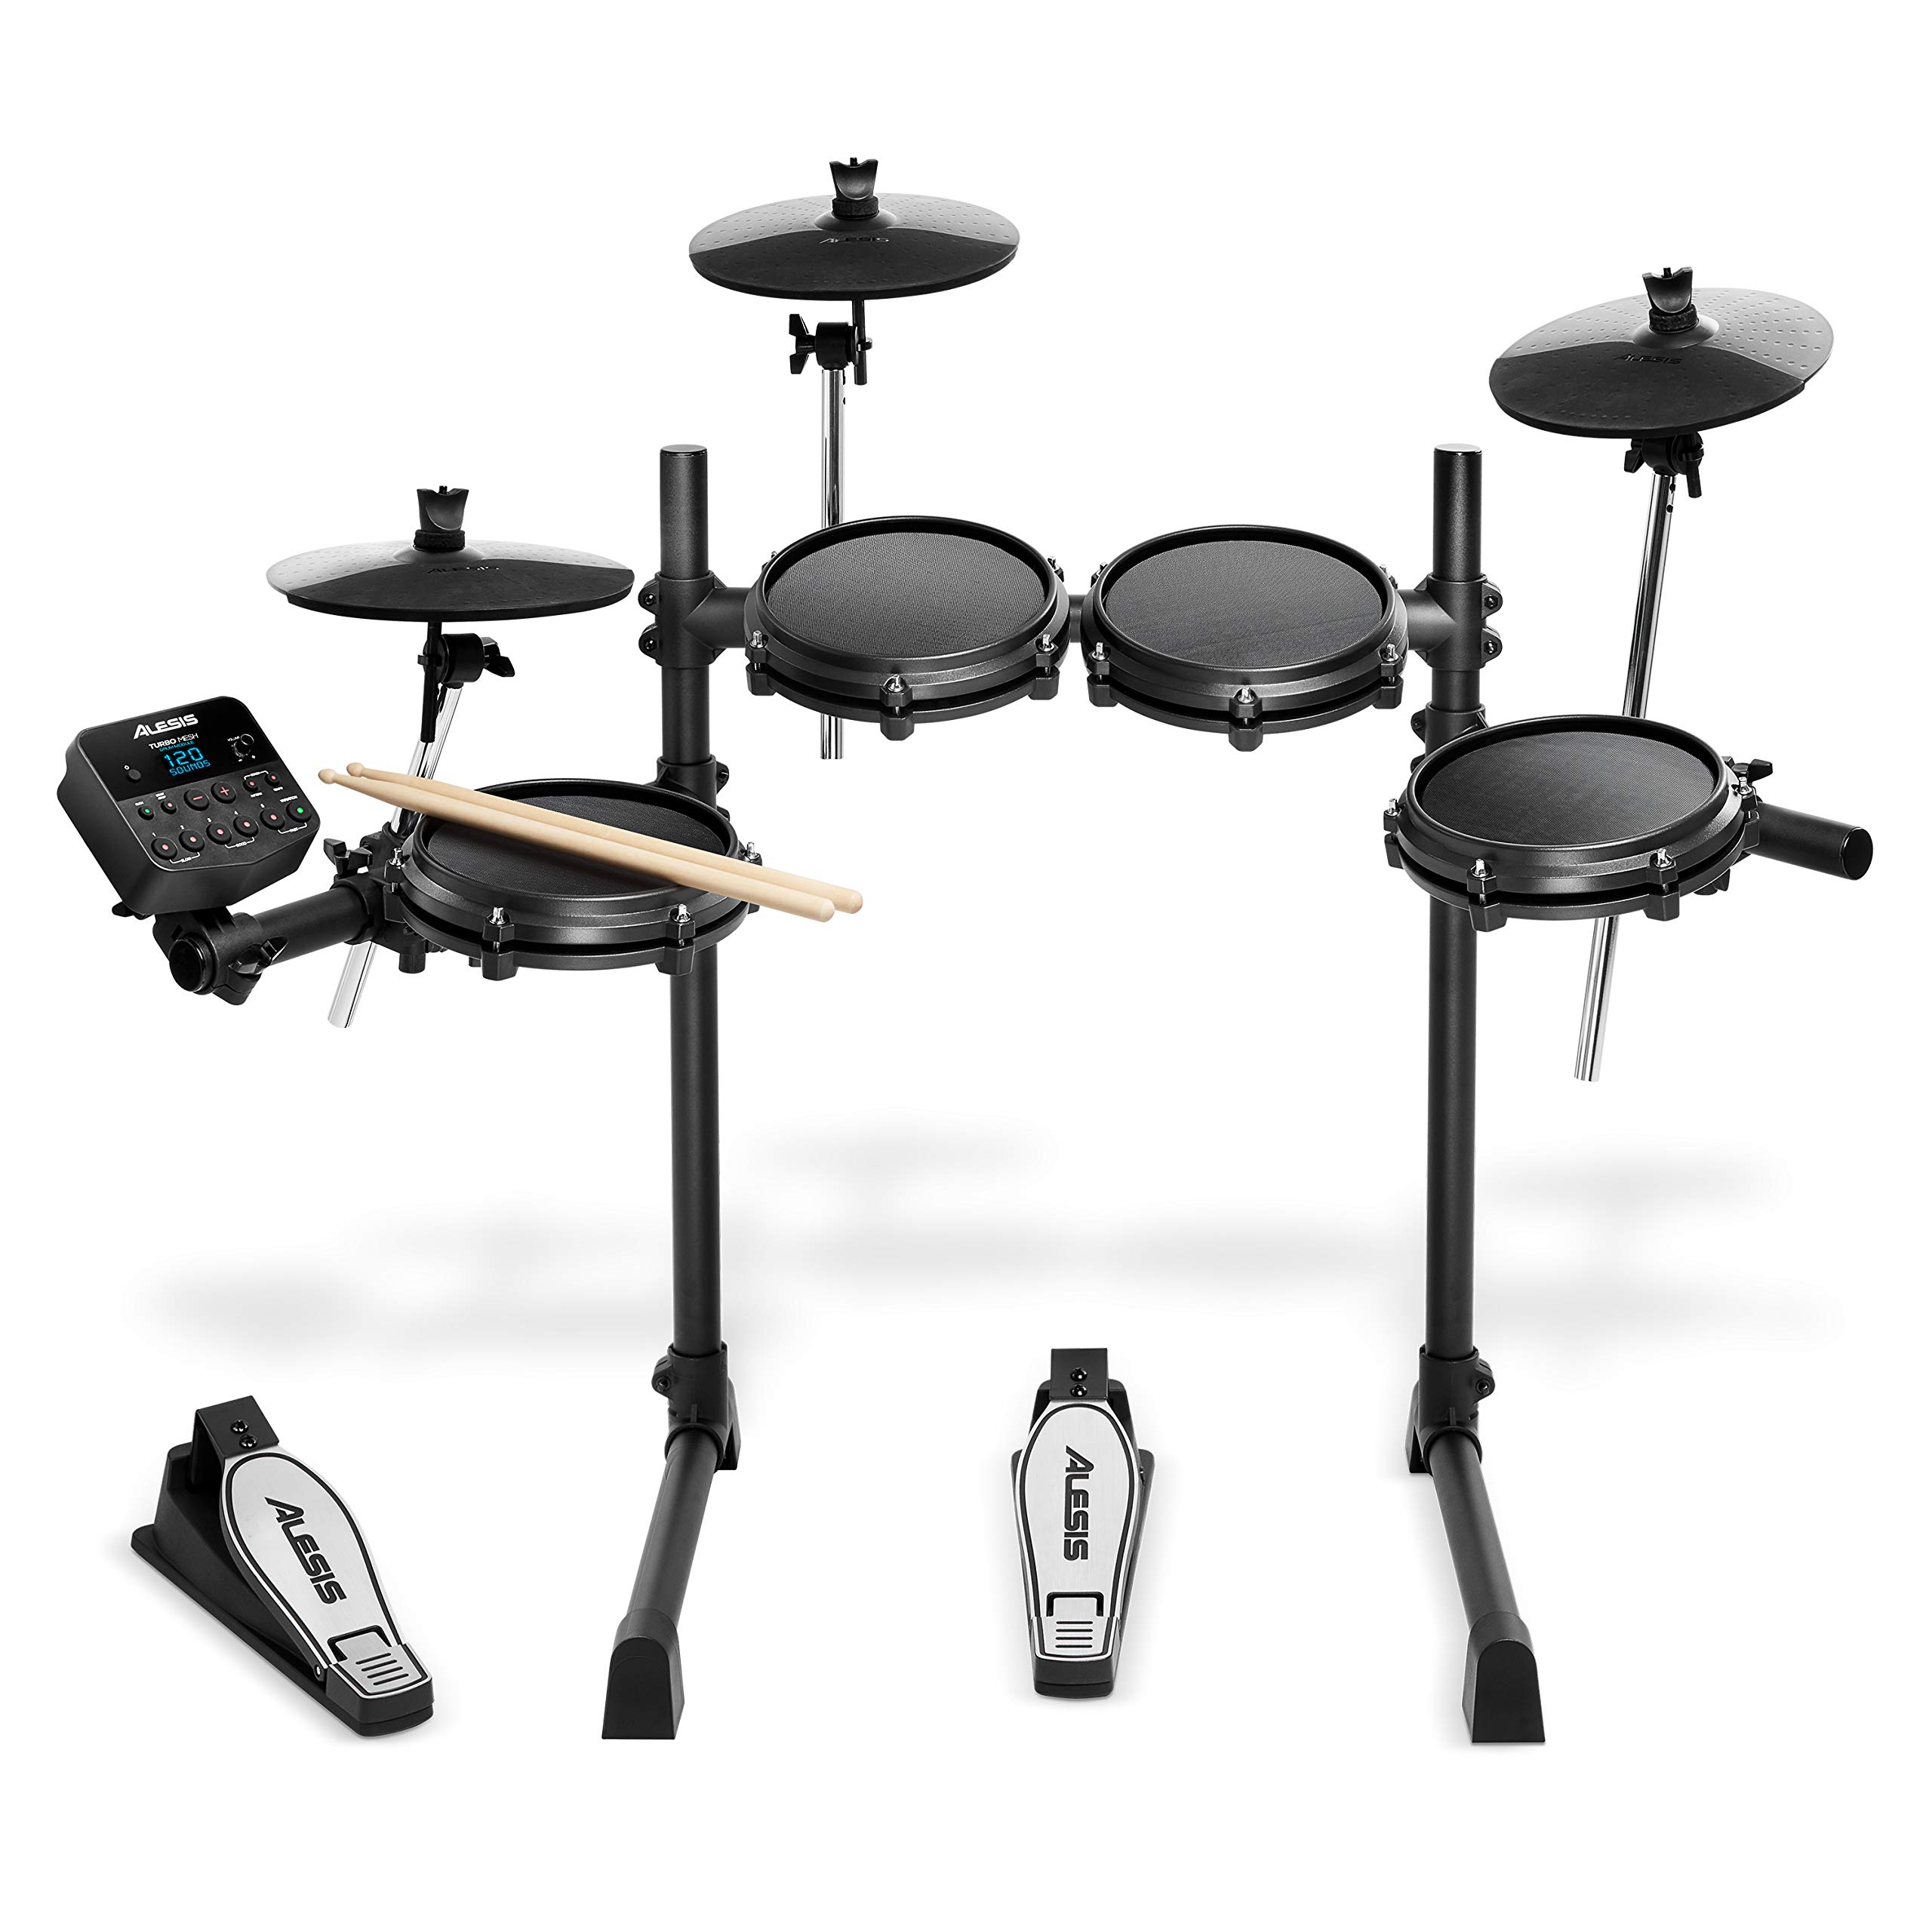 Alesis Drums Turbo Mesh Kit - Seven Piece Mesh Electric Drum Set with 100+ Sounds, 30 Play-Along Tracks, Drum Sticks & Connection Cables Included